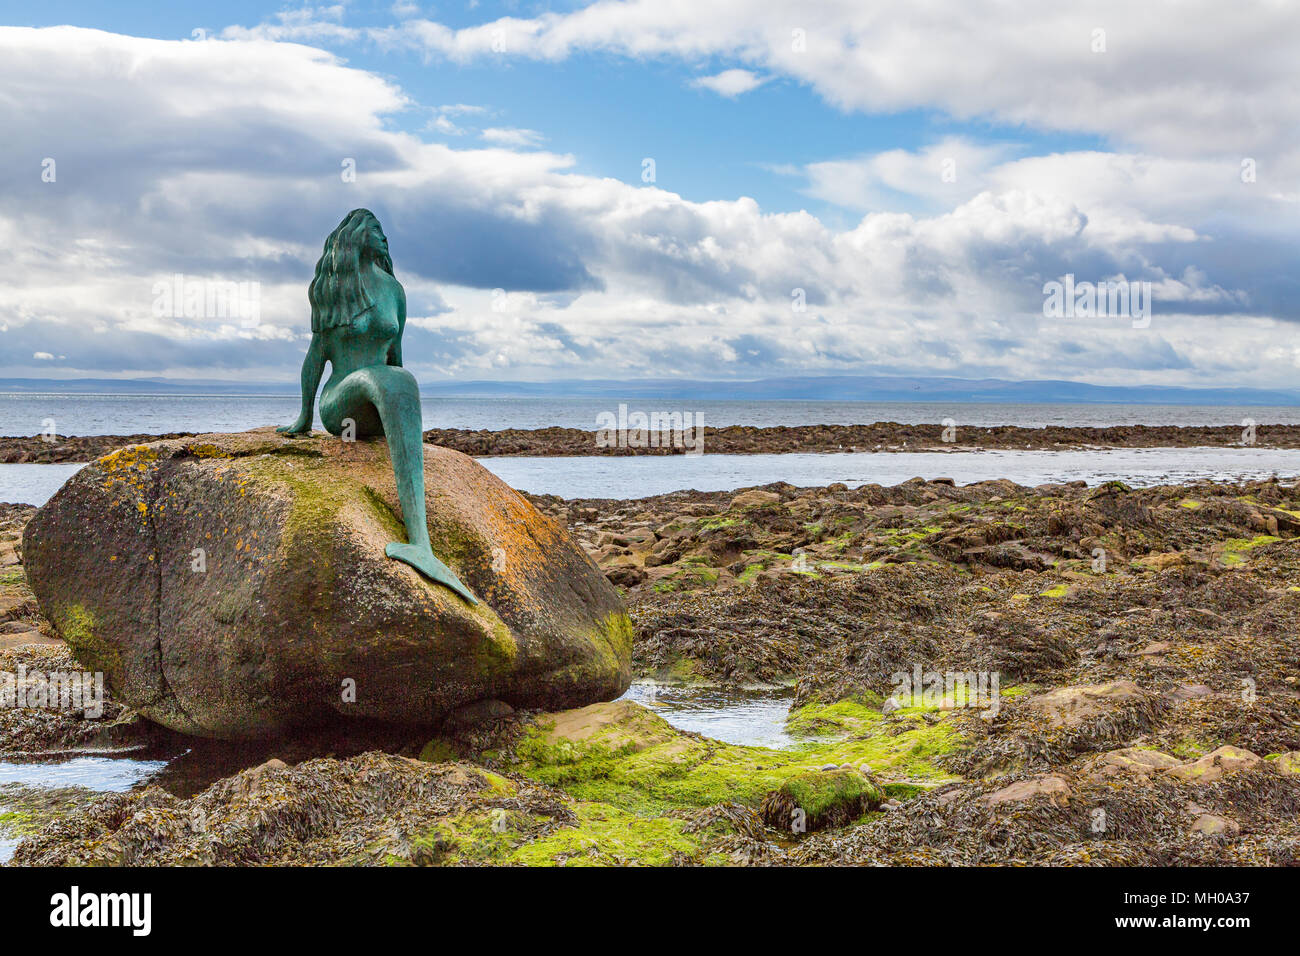 Mermaid Of The North - Haunting statue of the Mermaid sitting on the rocks near the small village of Balintore in the Scottish Highlands. Stock Photo